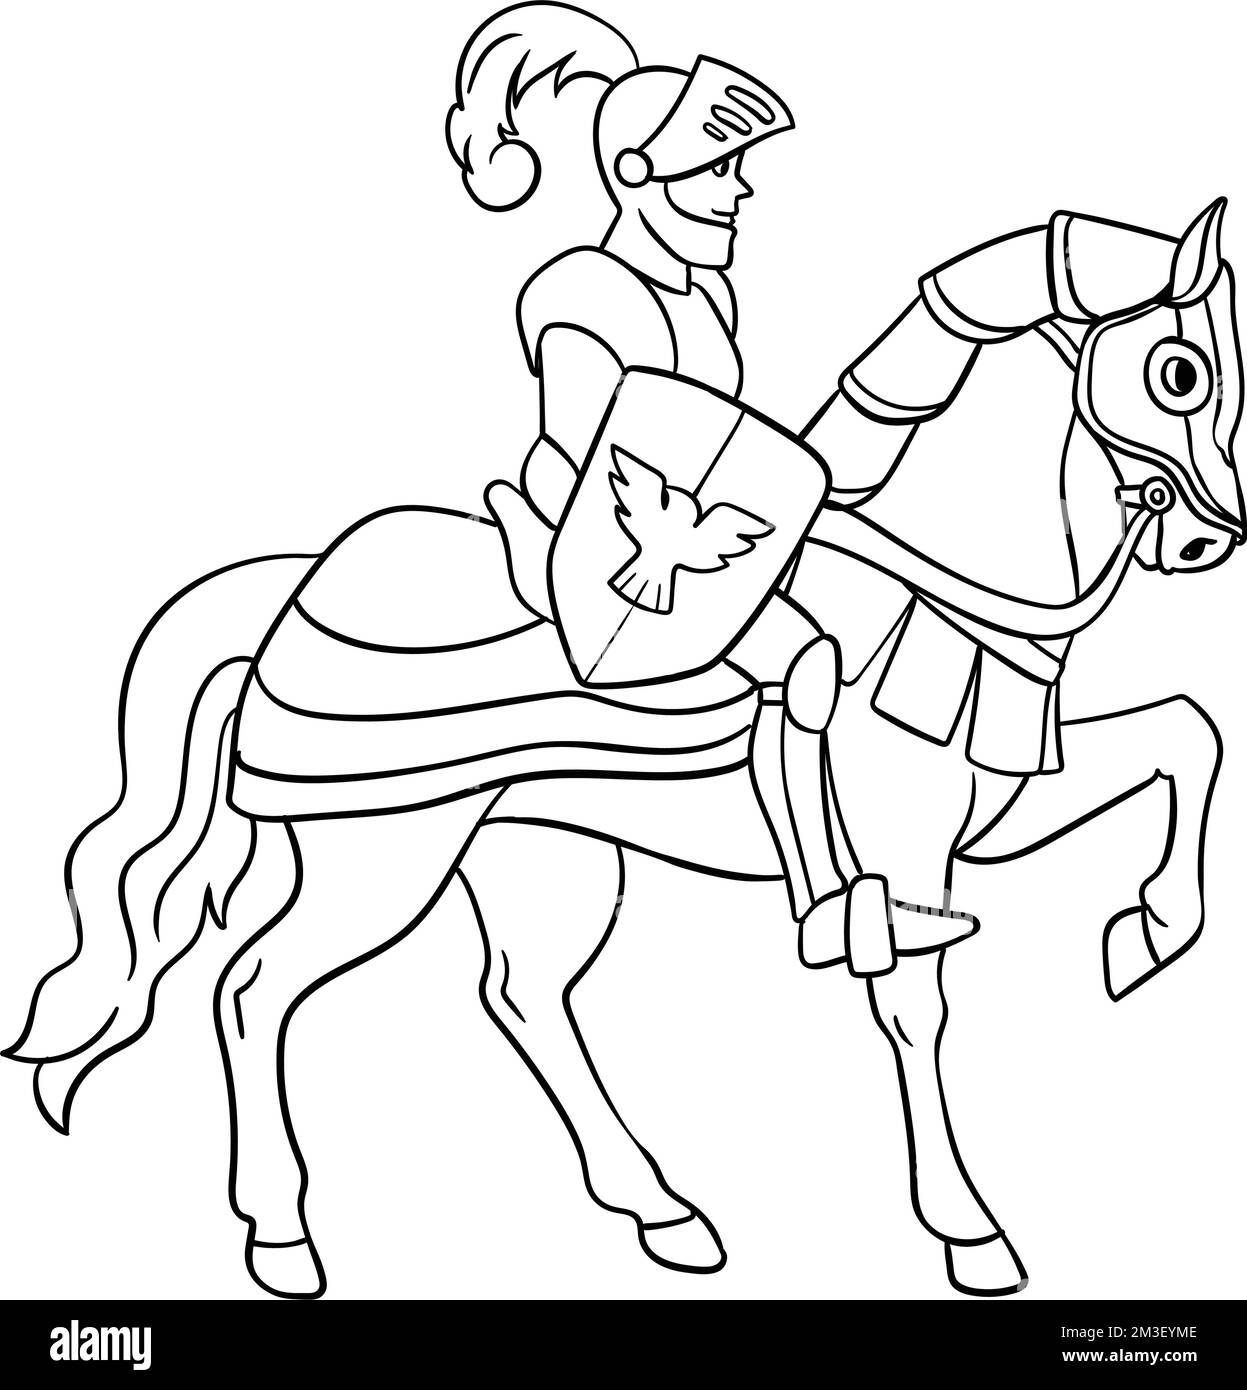 Knight on a Horse Isolated Coloring Page for Kids Stock Vector Image ...